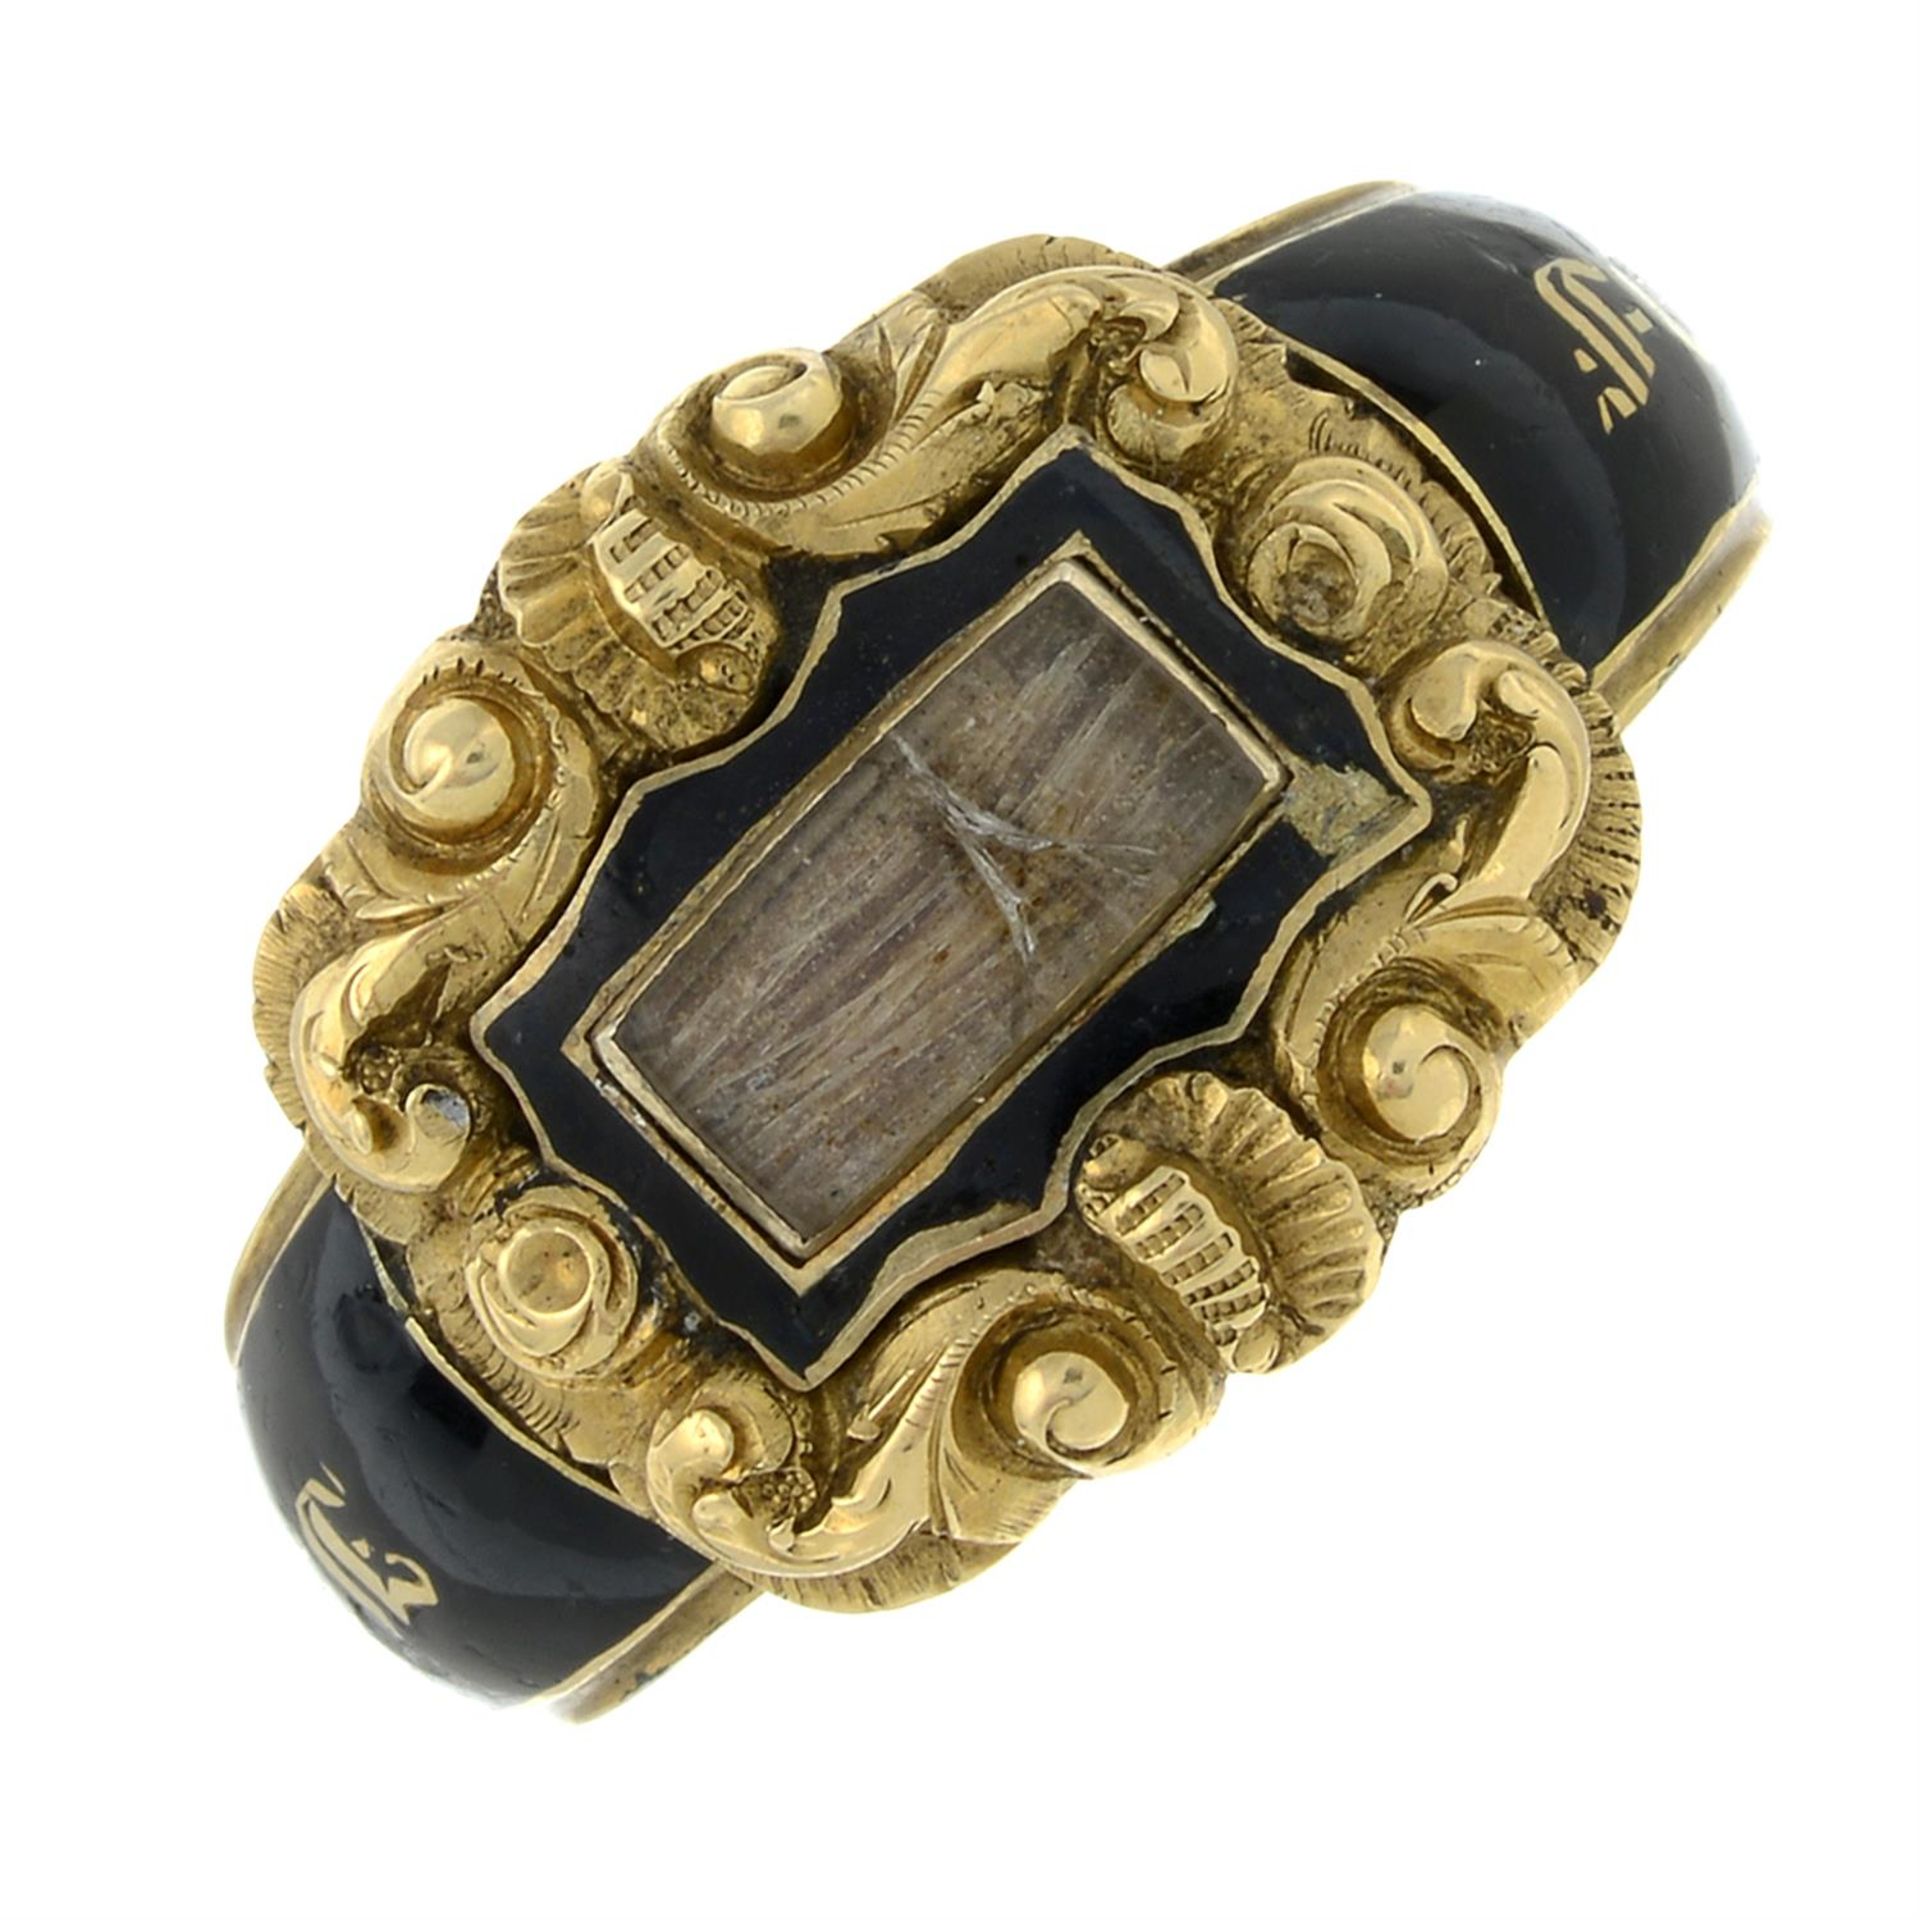 A mid Victorian 18ct gold and enamel mourning ring.